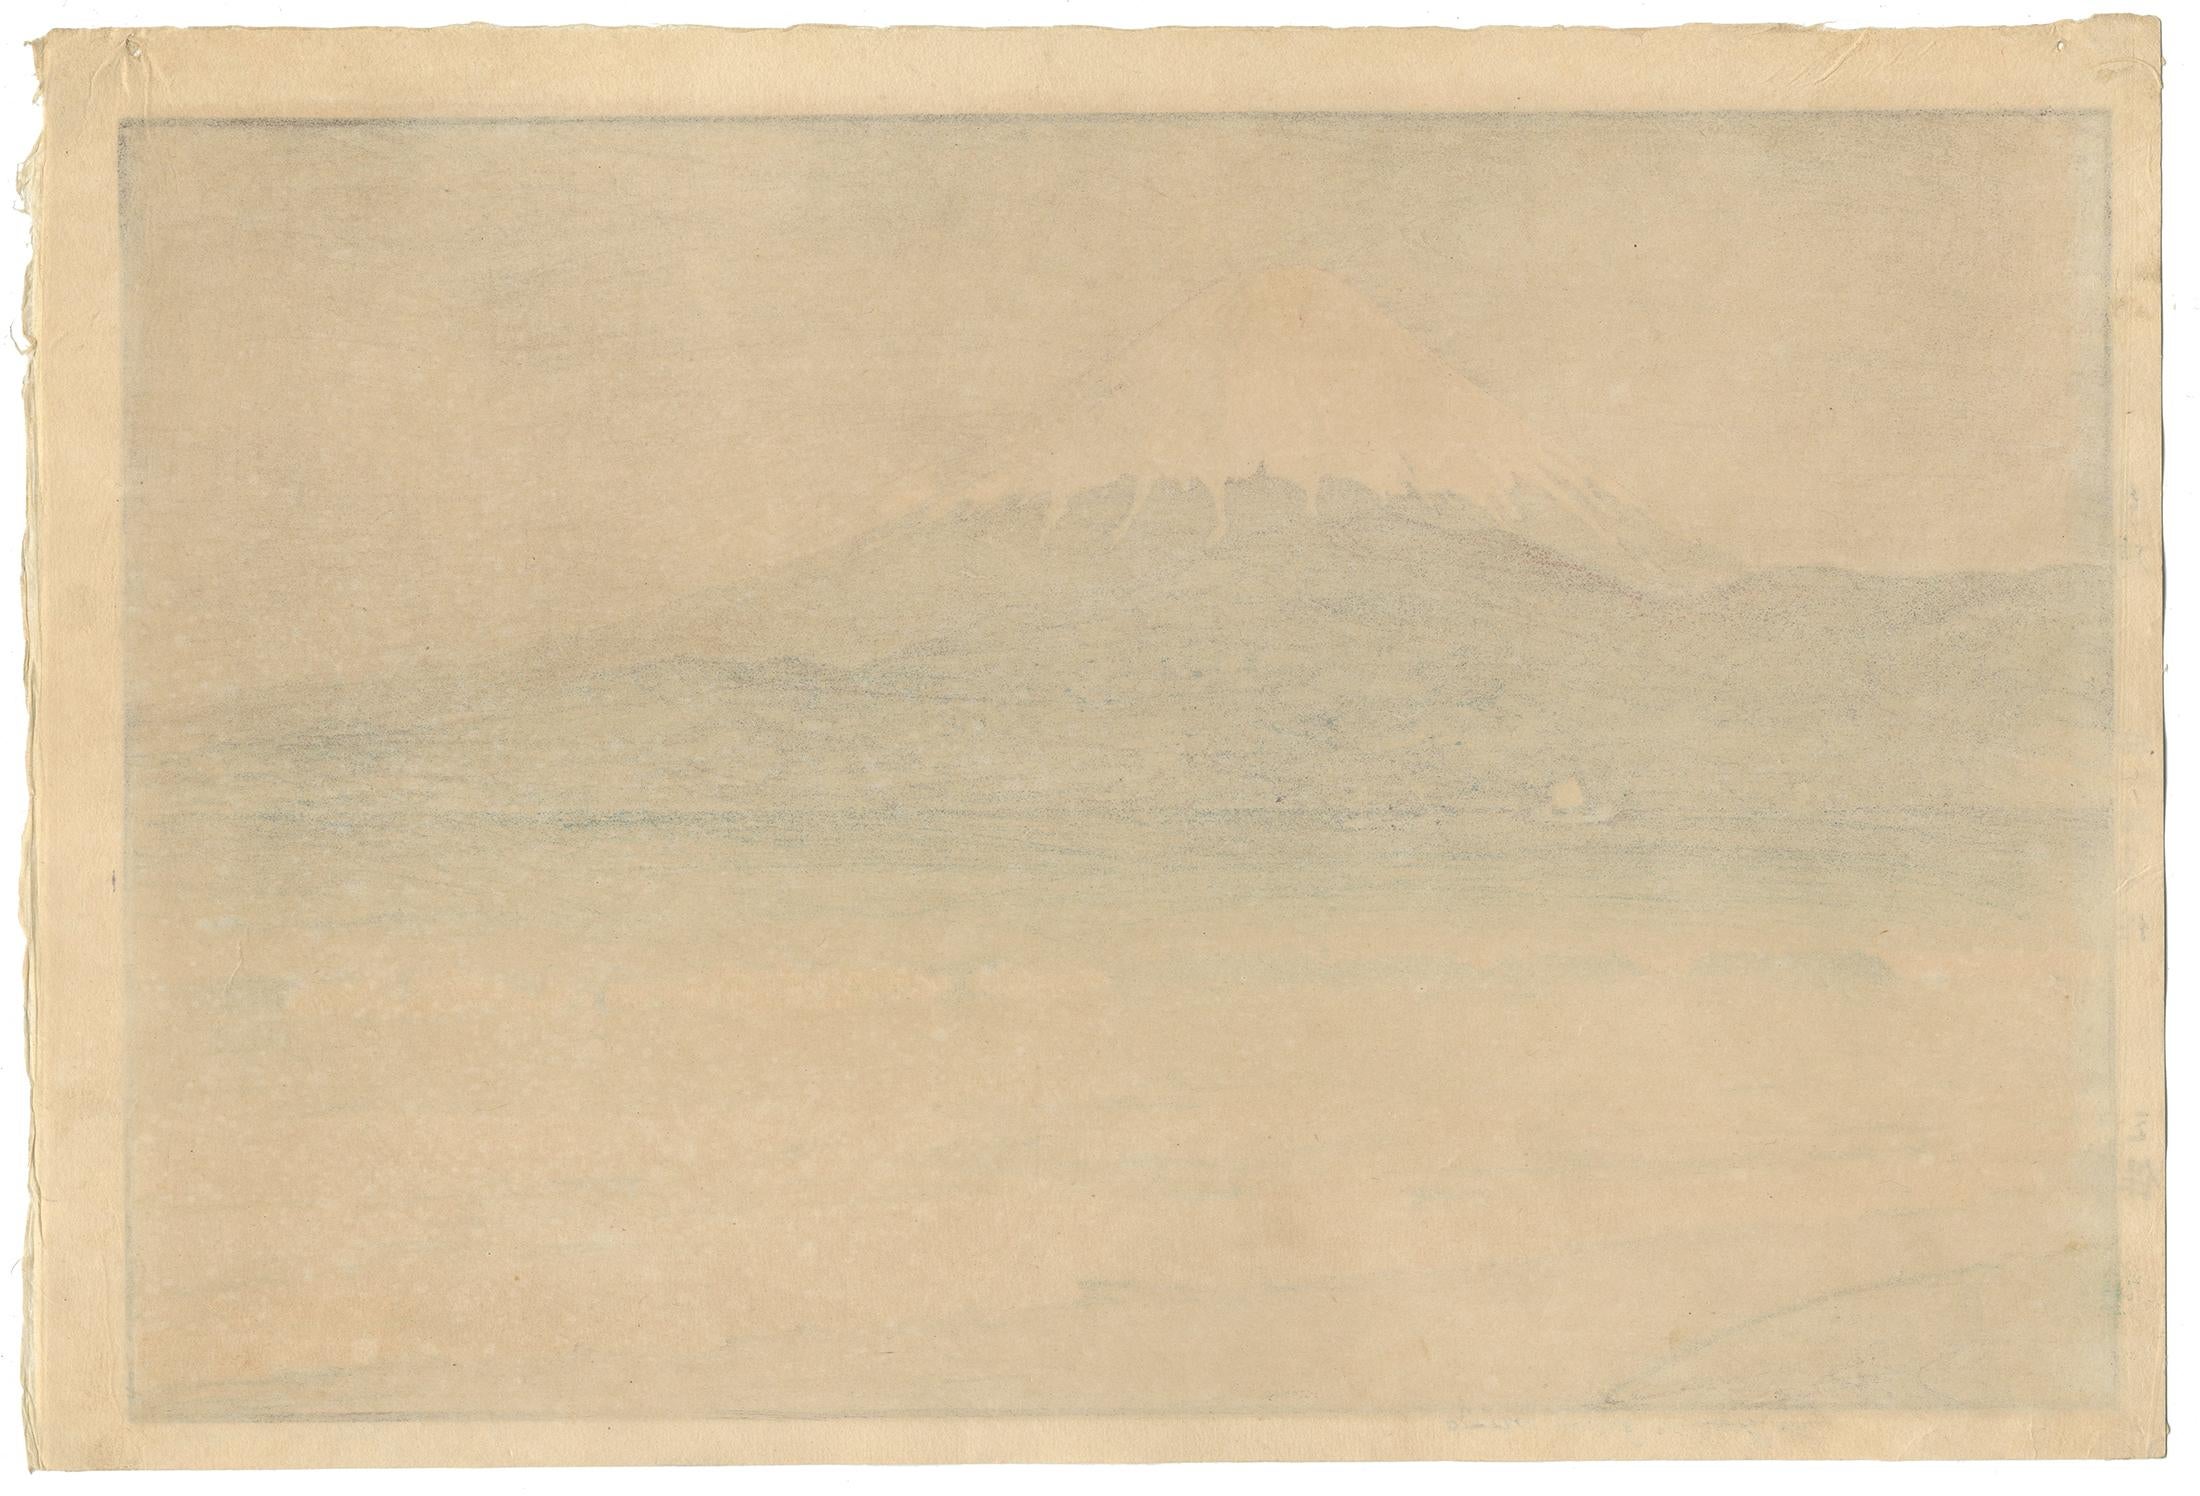 Artist: Hiroshi Yoshida (1876-1950)
Title: Miho Cape
Date: 1935 
Publisher: Original pencil signature 
Dimensions: 40.6 x 27.2 cm

The bay of Miho in Shizuoka Prefecture is famed for its twisting seaside pines. The locale became the setting